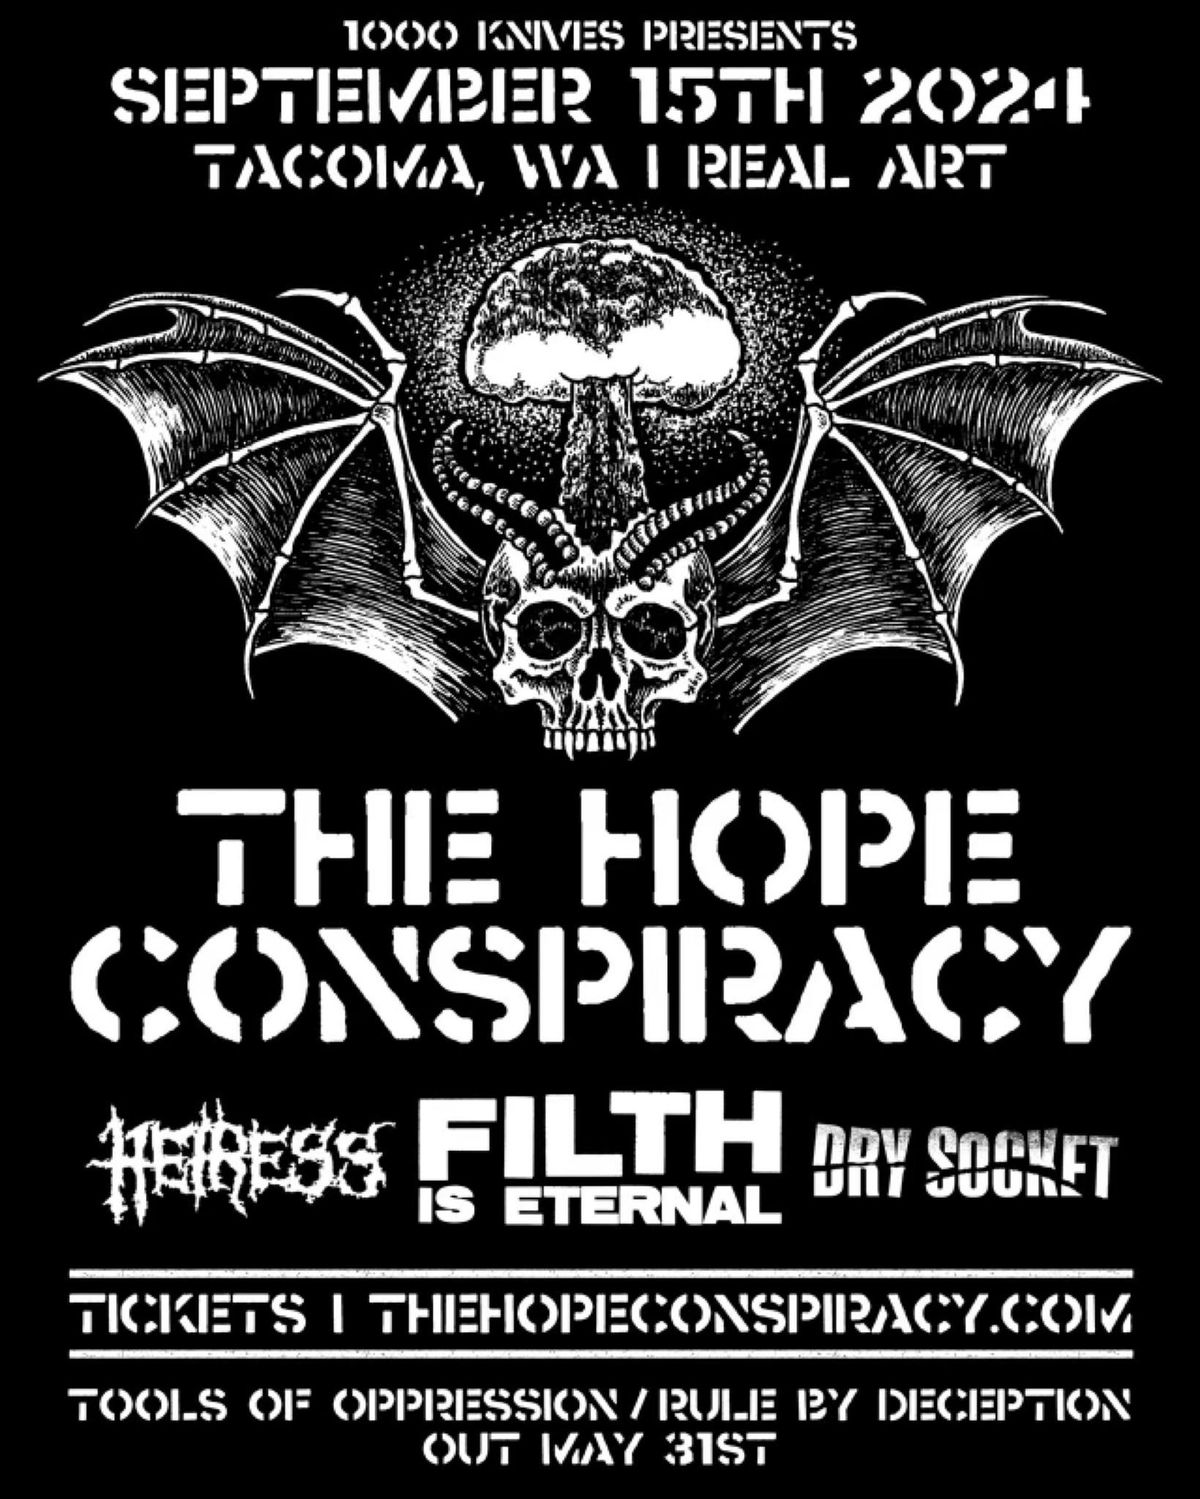 1000 Knives Presents: The Hope Conspiracy, Heiress, Filth Is Eternal, Dry Socket